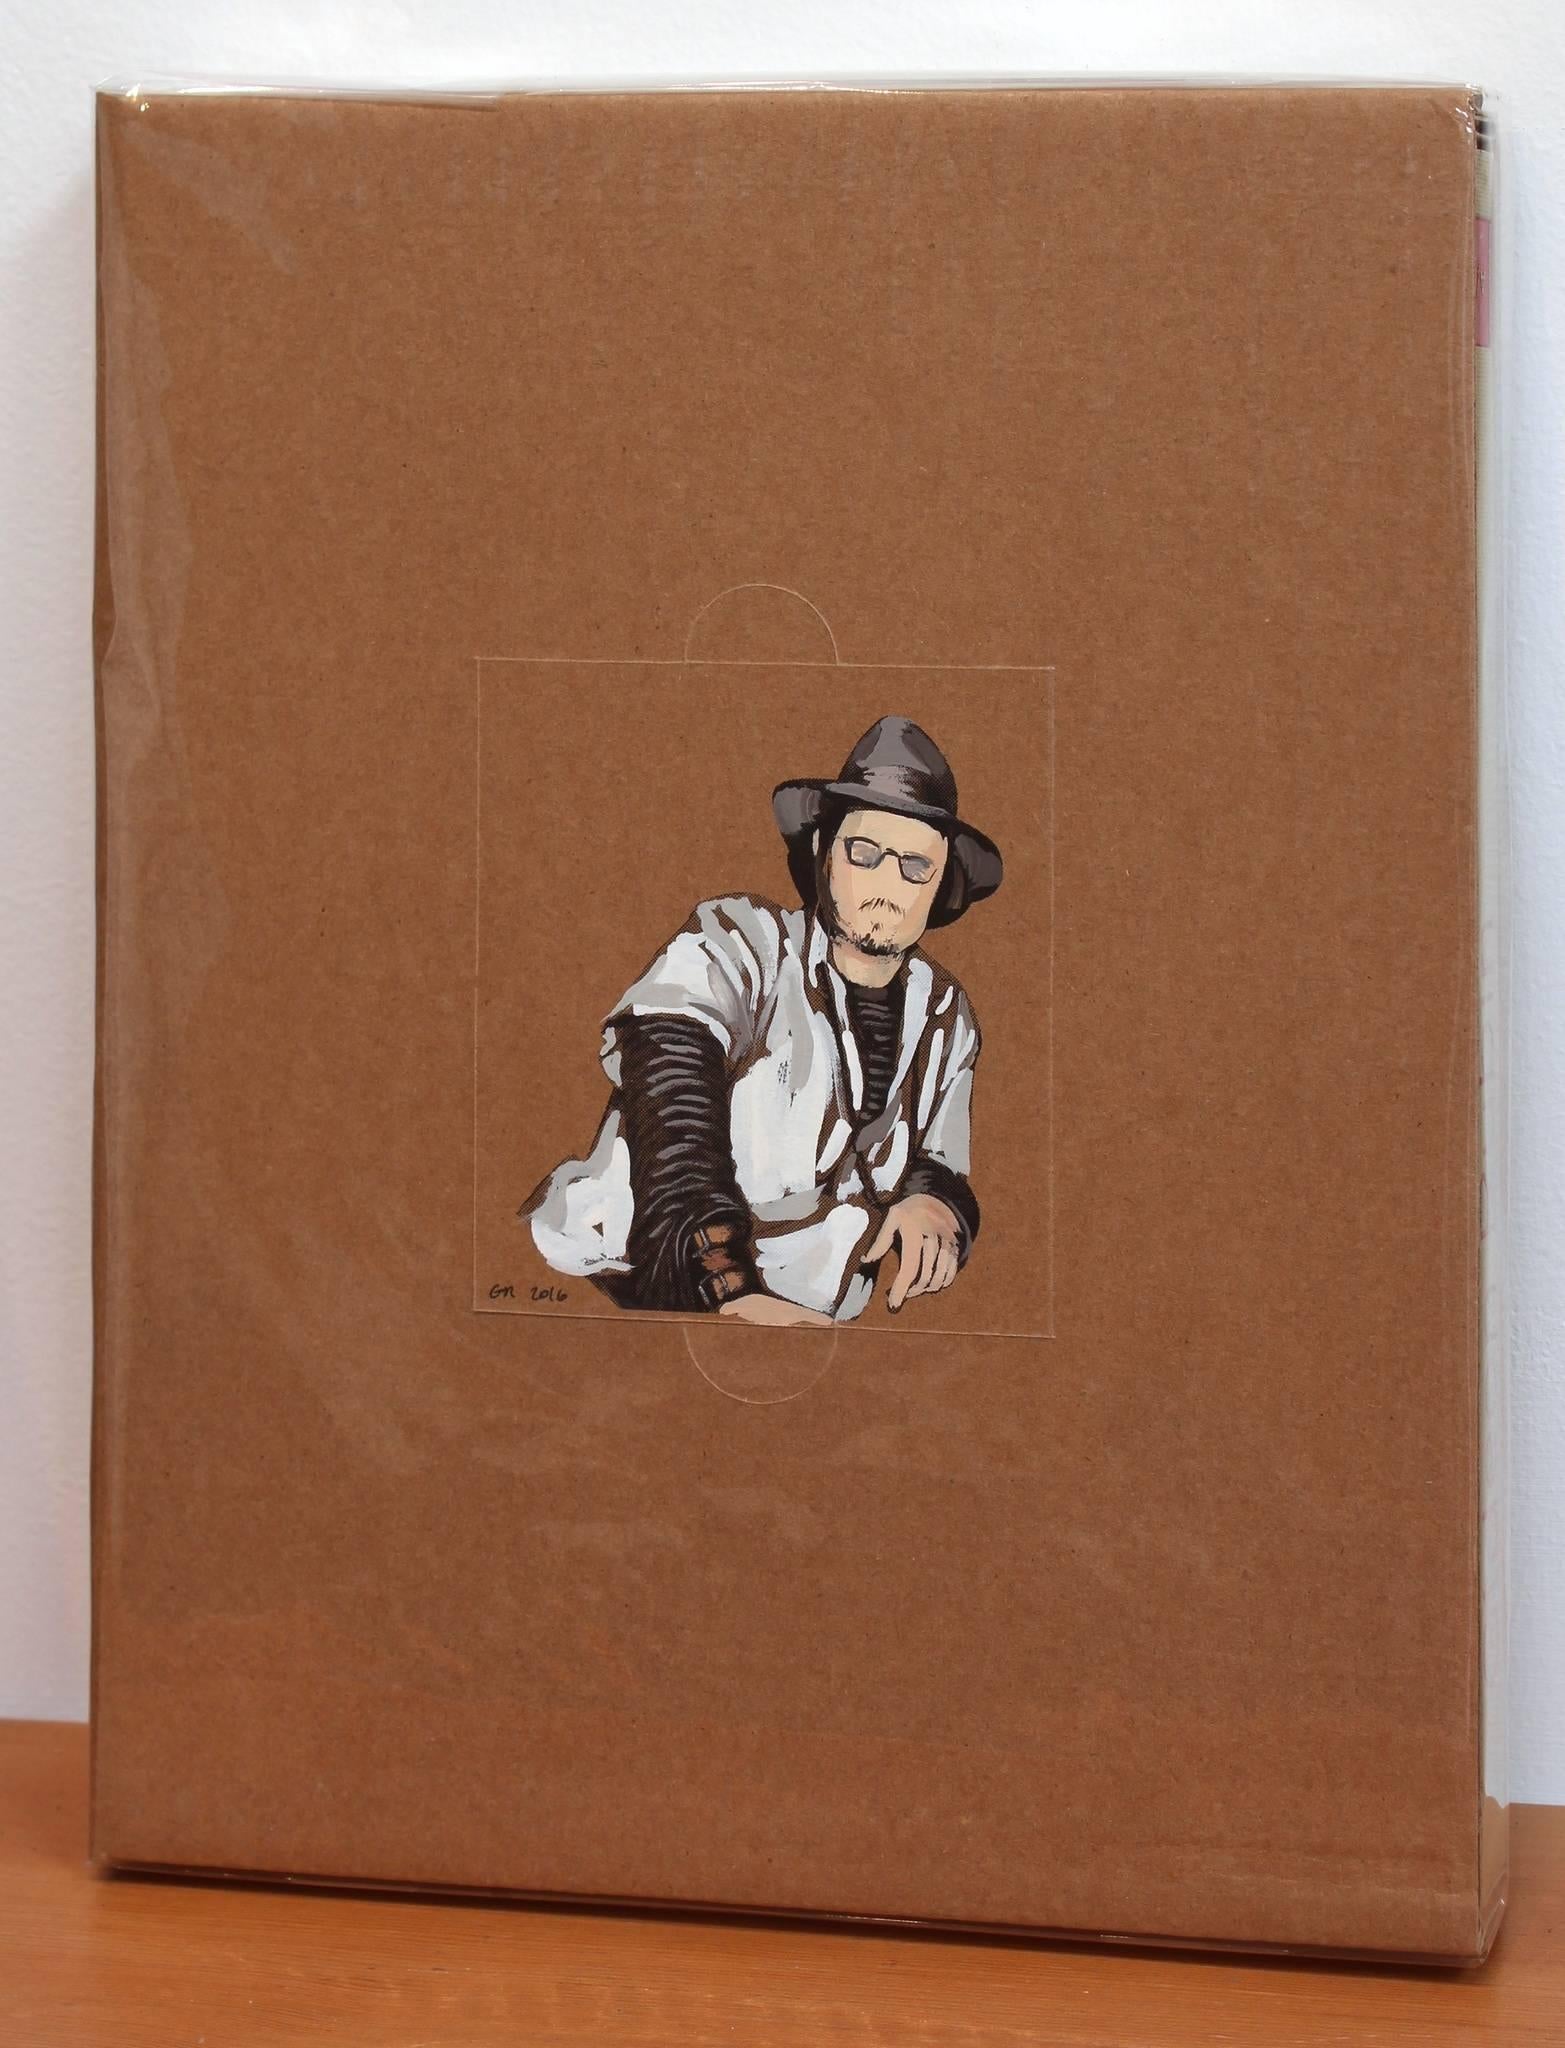 Special edition monograph - painted by artist  "Coinciding with a touring exhibition of paintings and works on paper, this book is the first monograph on the acclaimed young Israeli painter Gideon Rubin...  ...This exquisite book features